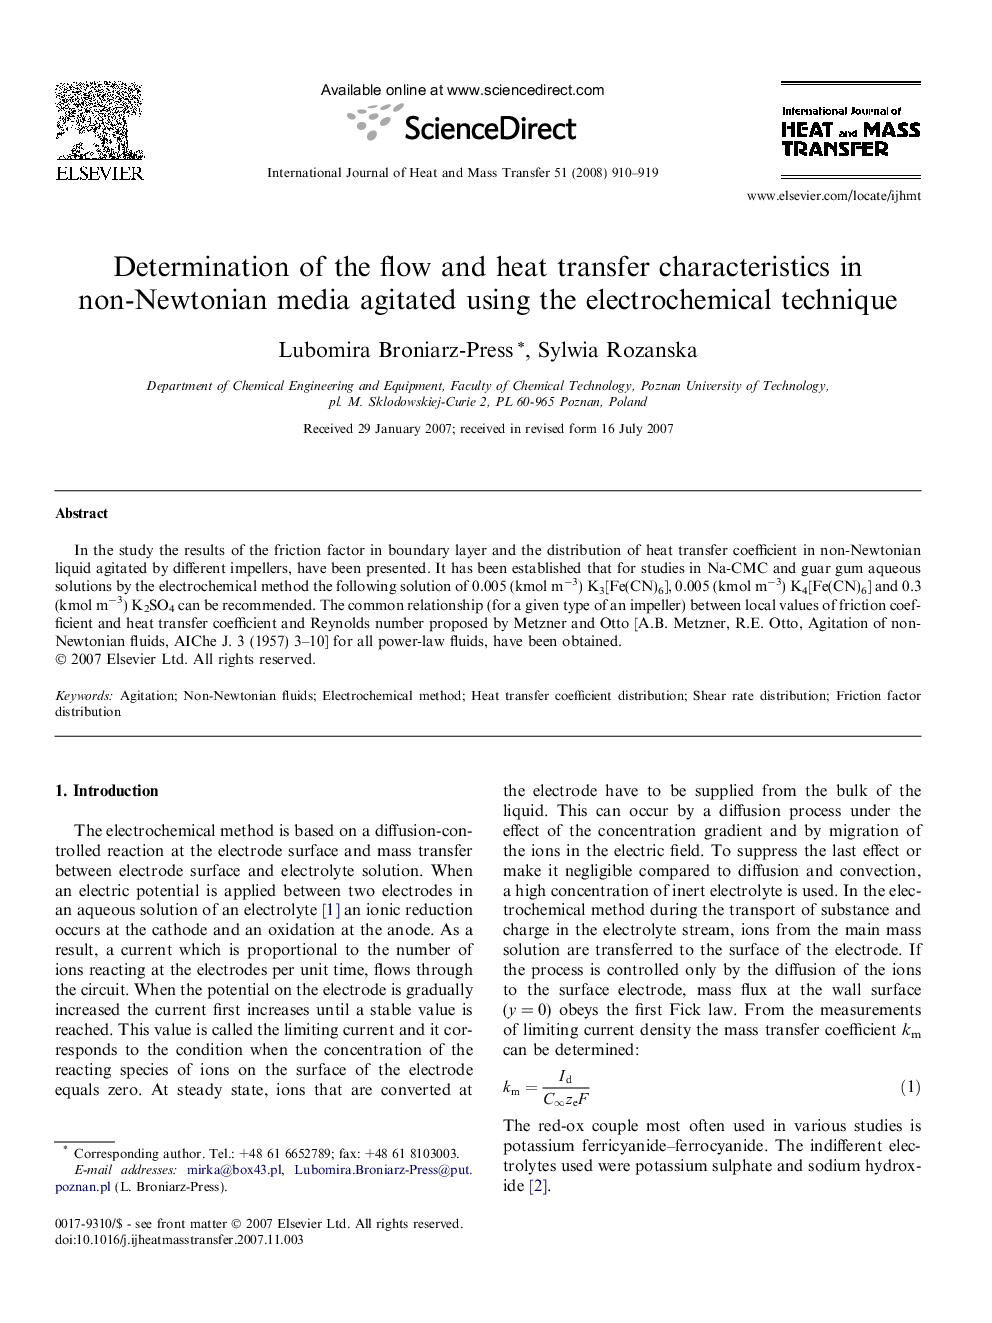 Determination of the flow and heat transfer characteristics in non-Newtonian media agitated using the electrochemical technique